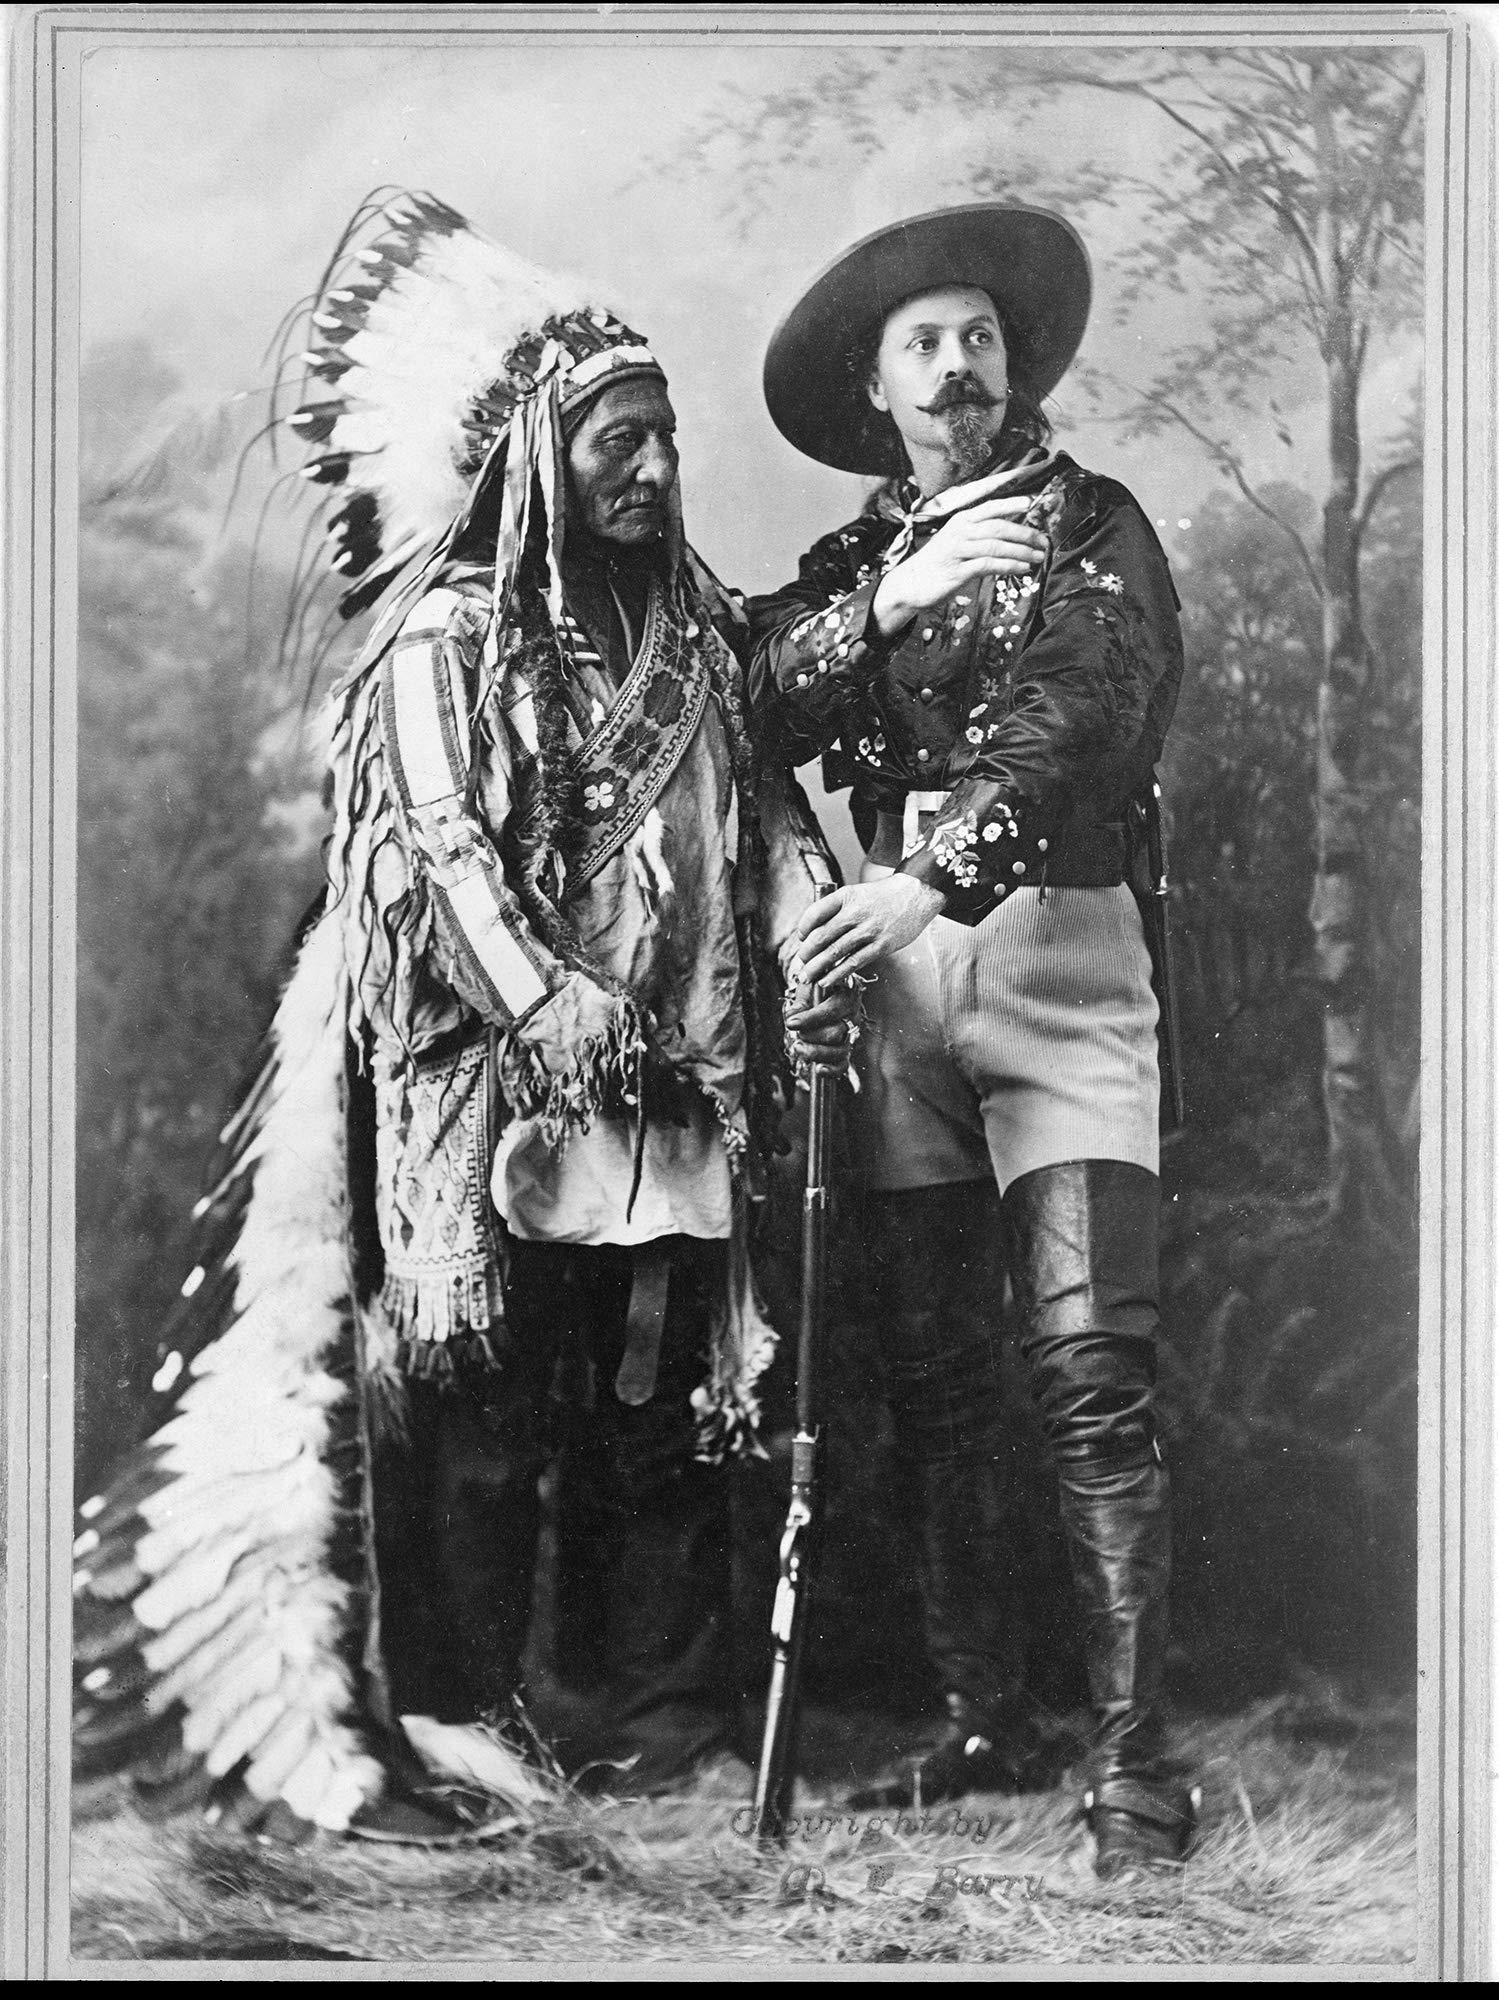 Frame a Patent Sitting Bull and Buffalo Bill Photograph - Historical Artwork from 1897 - (11" x 14") - Matte